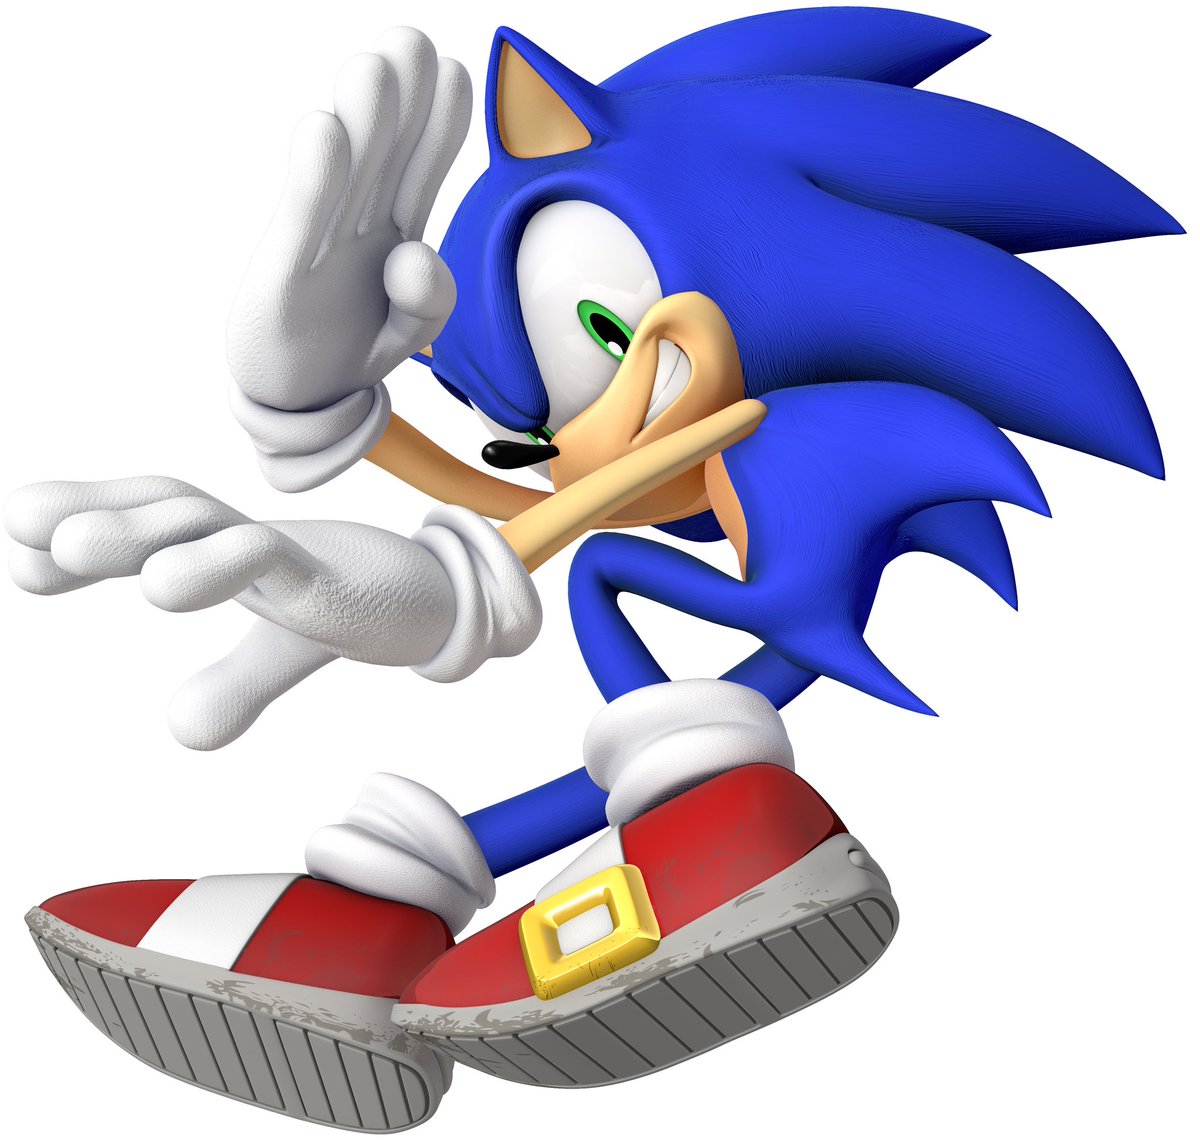 Sorry for being offline lol. Here's a render to make up for it #SonicTheHedgehog